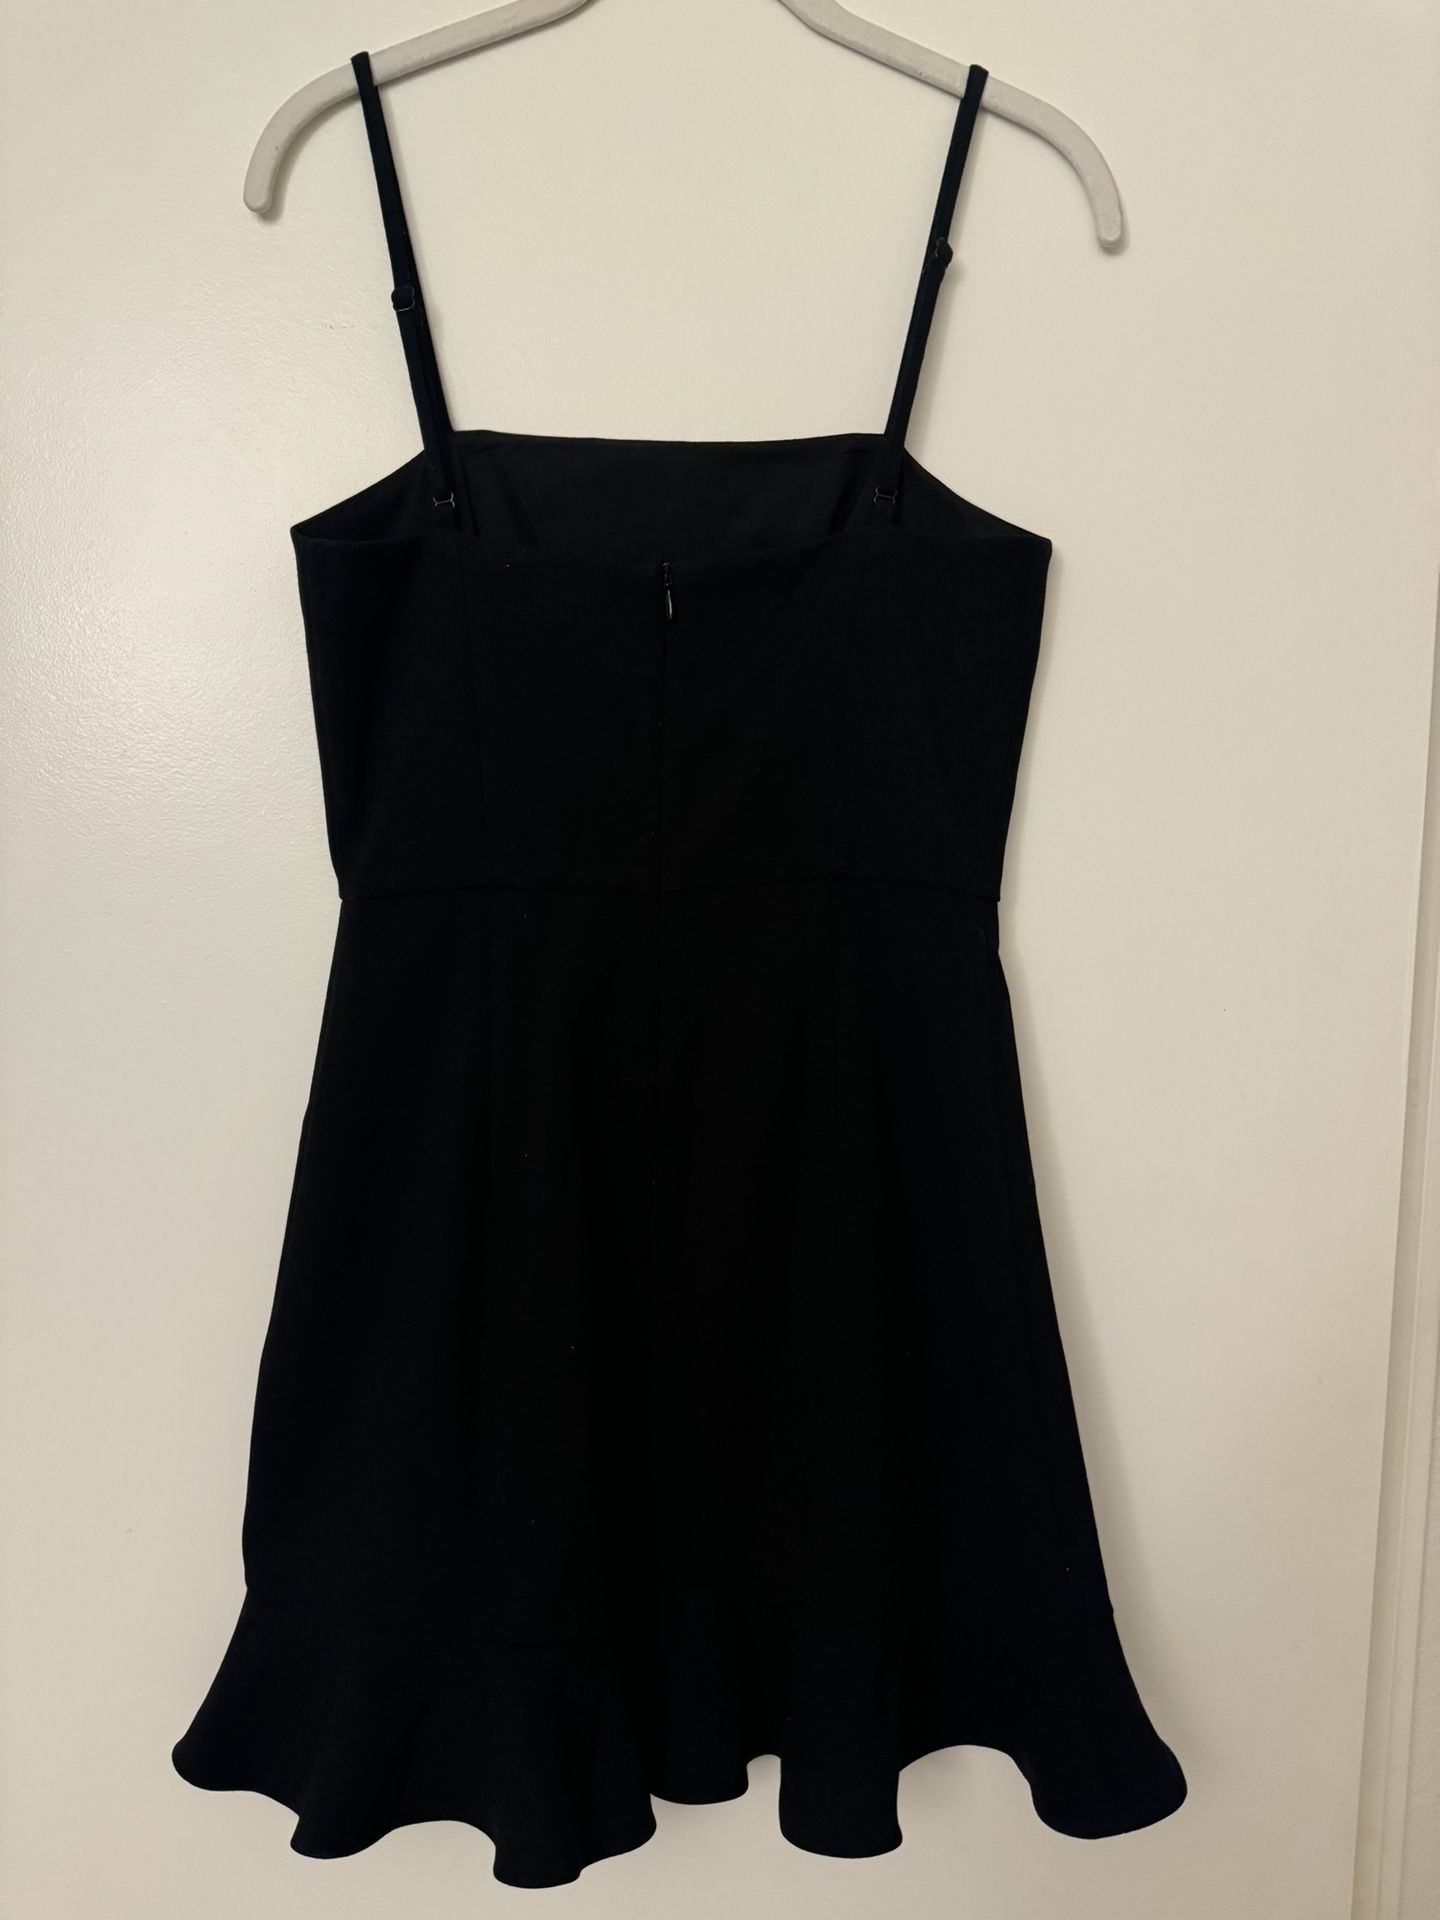 French Connection ruffle black dress size 2